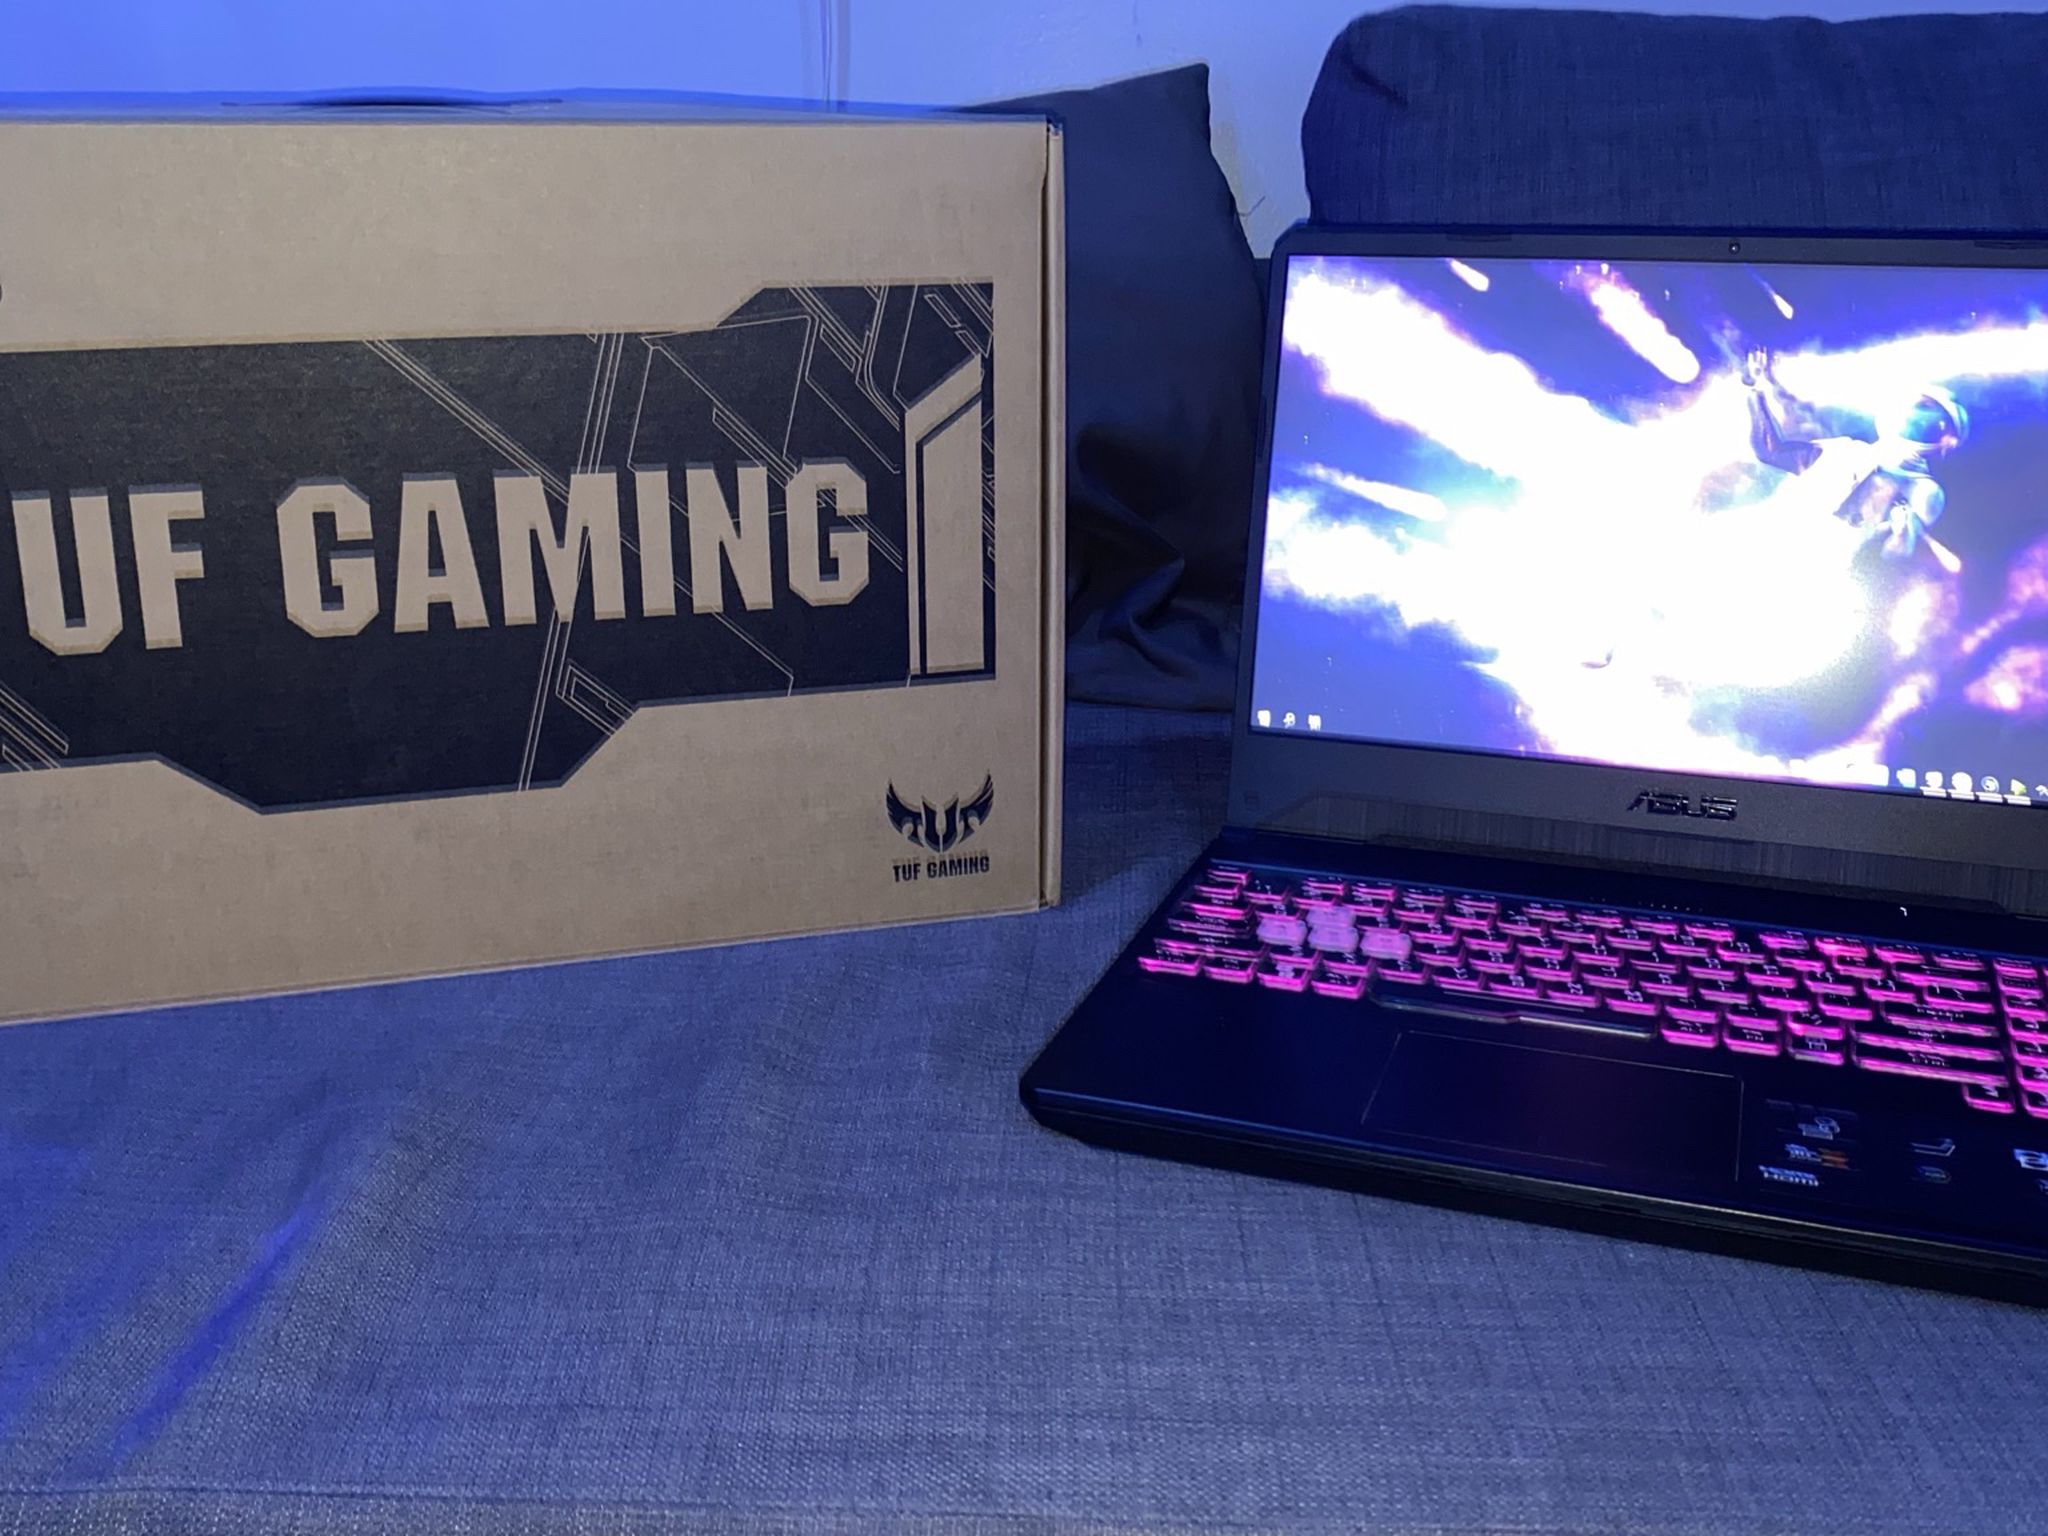 ASUS TUF FX505DV (UPGRADED) GAMING LAPTOP RTX2060 Ryzen 5 32GB RAM 1.5TB Memory COMES WITH FREE LAPTOP STAND